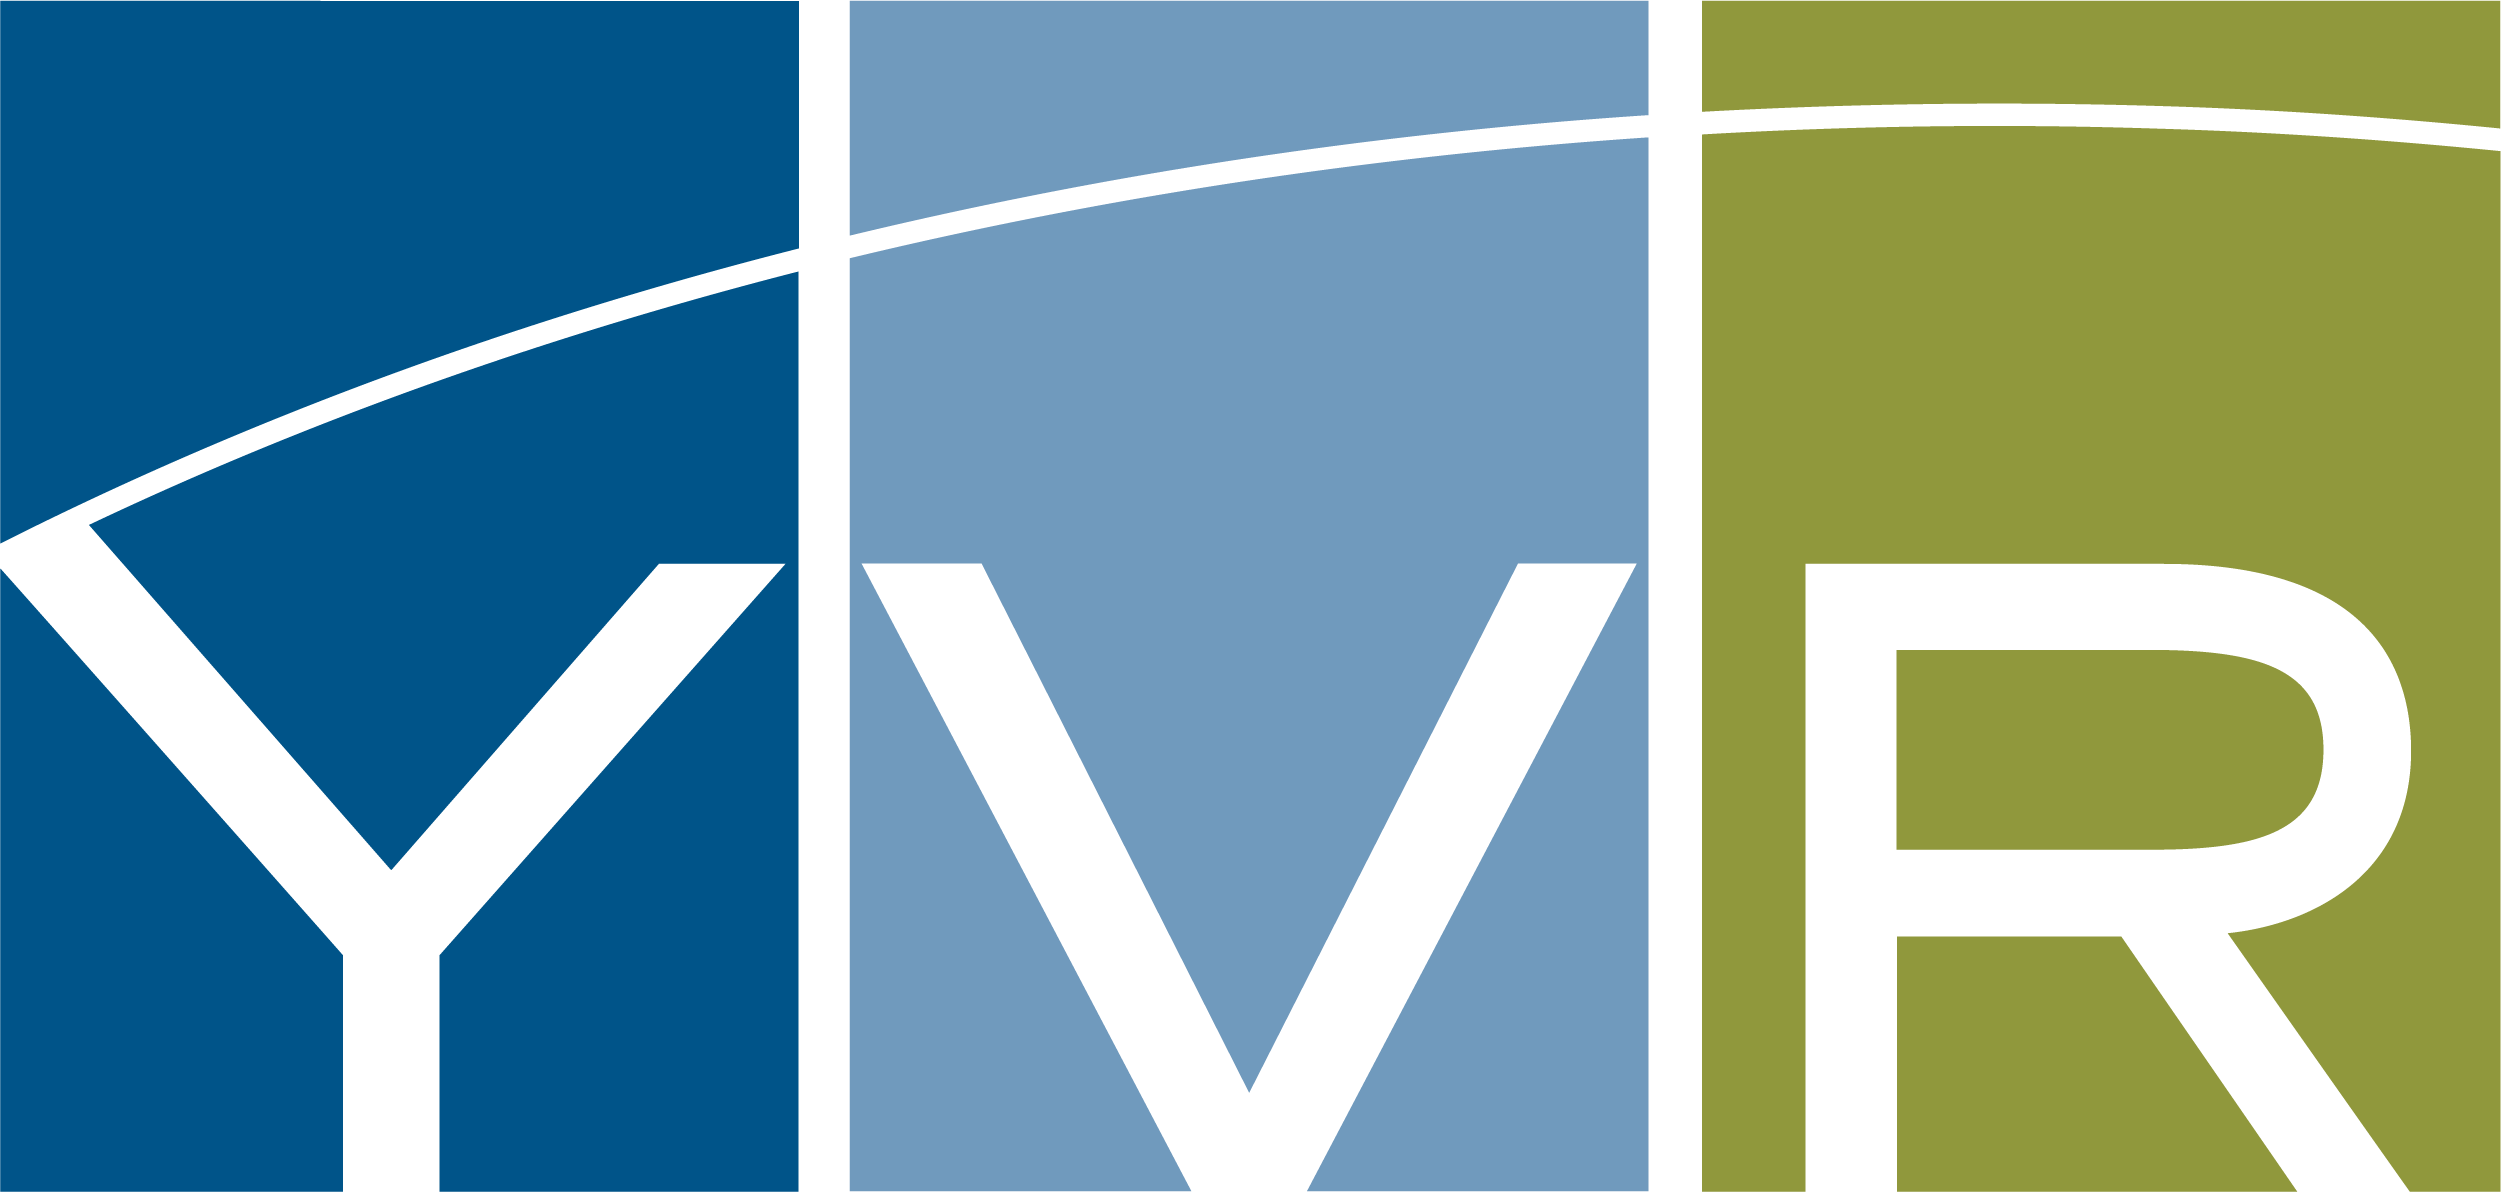 https://concordparking.com/wp-content/uploads/2021/12/vancouver-international-airport-yvr-logo-vector.png